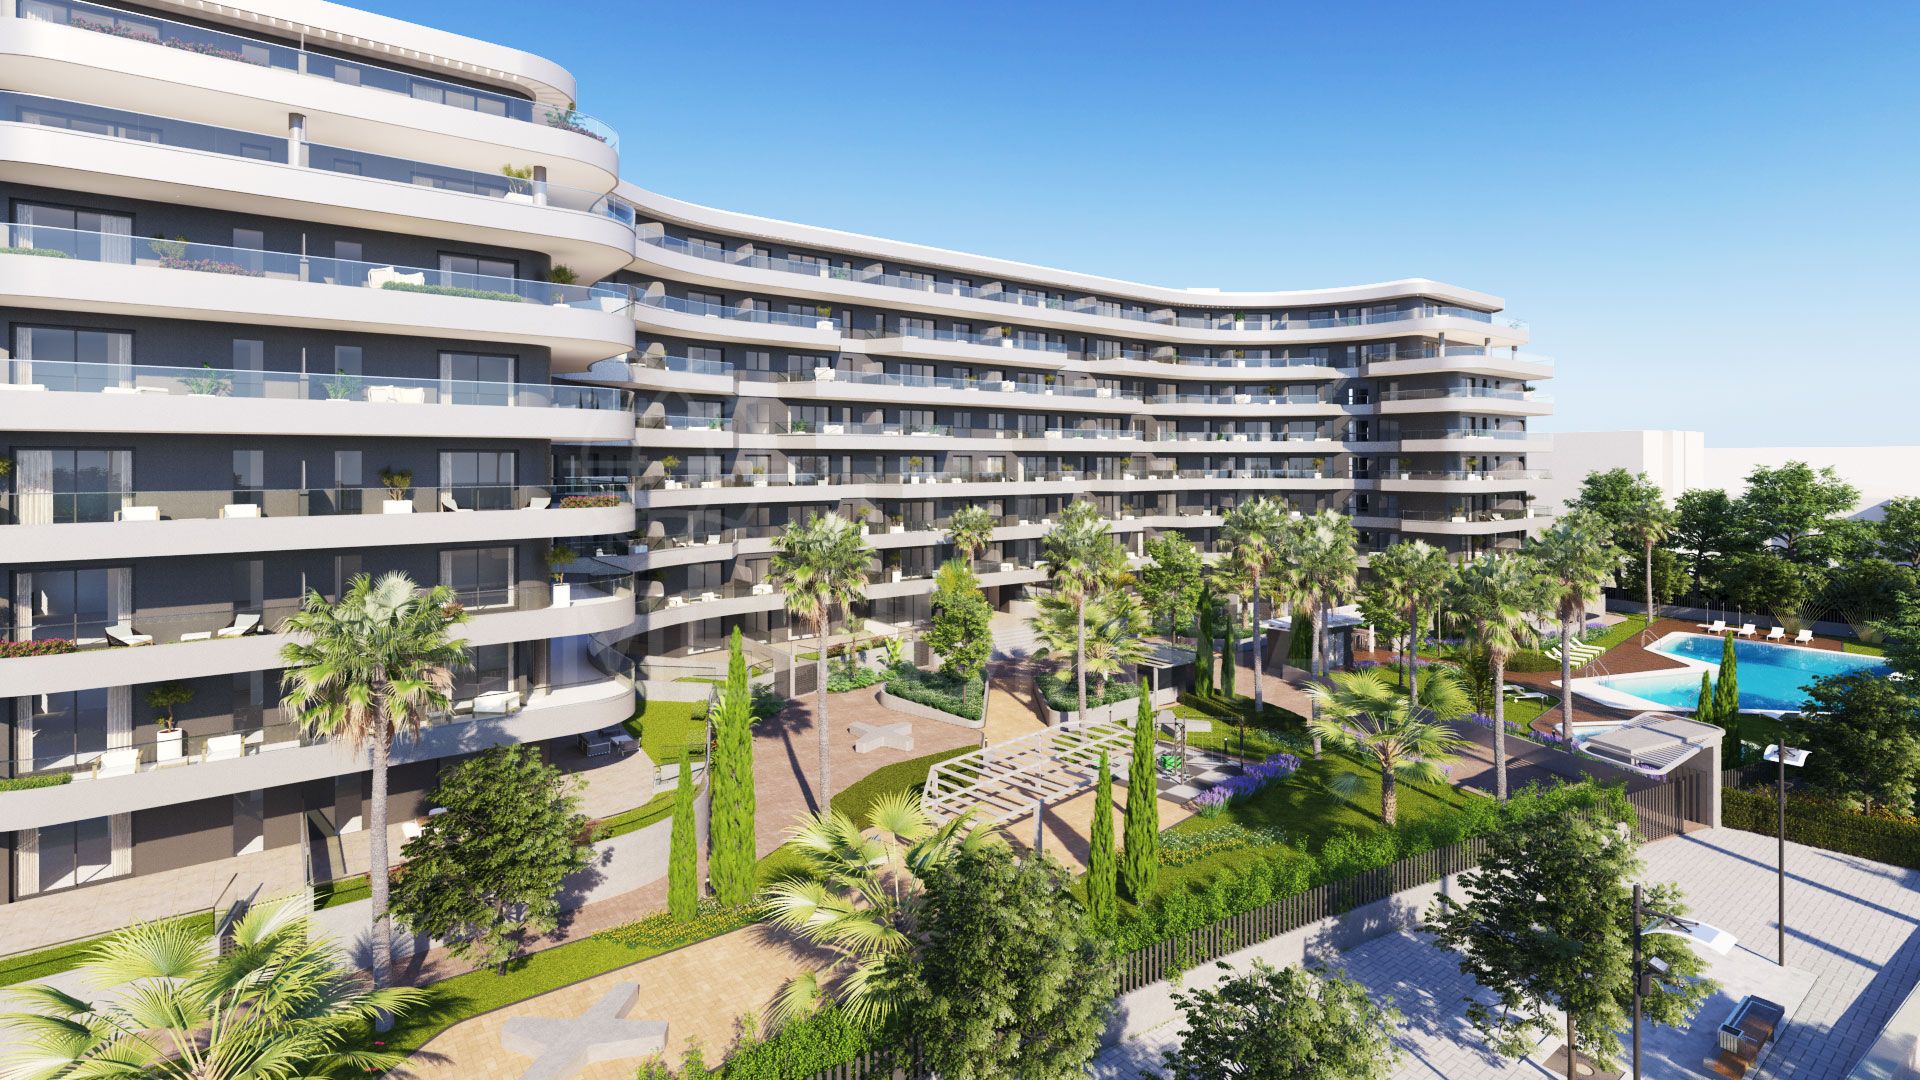 Halia, Malaga - A modern residential complex made up of apartments with 1 - 4 bedrooms in Malaga city centre